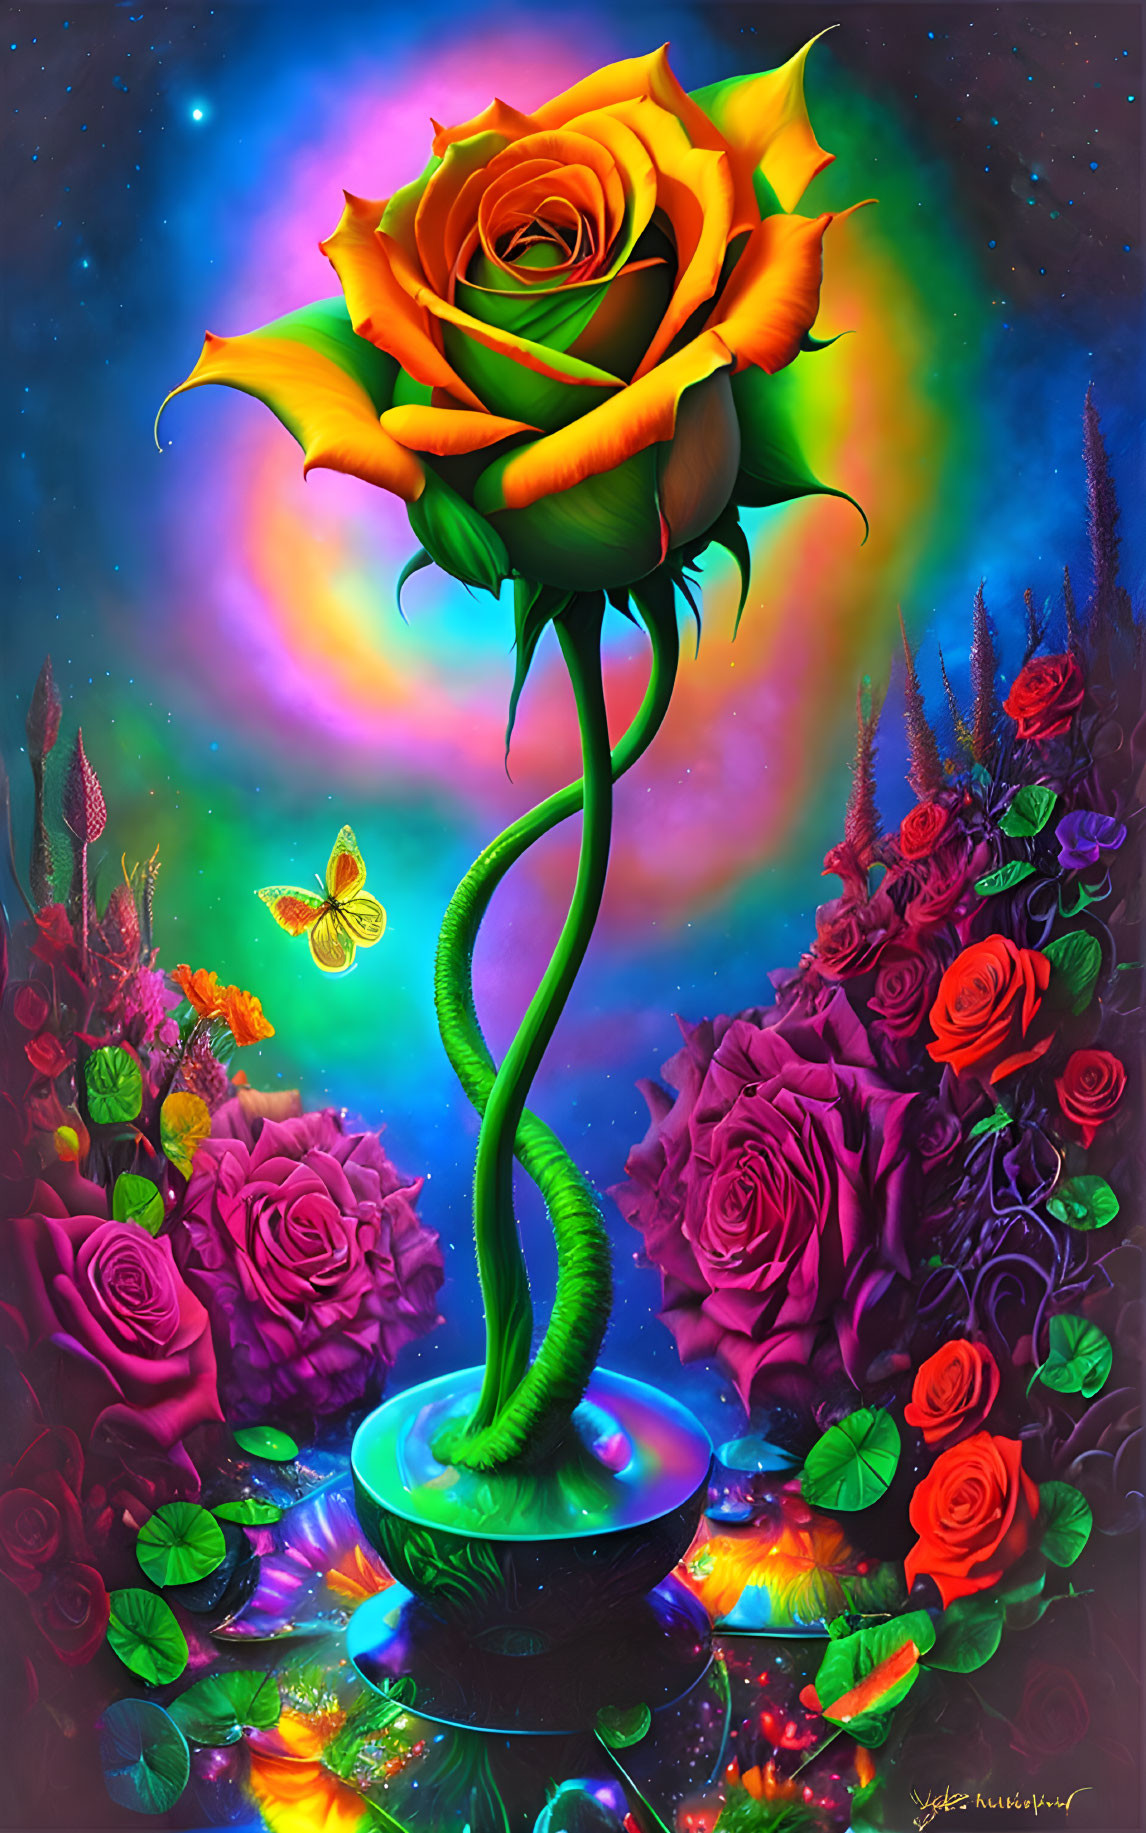 Colorful artwork: Giant yellow rose, multicolored roses, butterfly, cosmic background